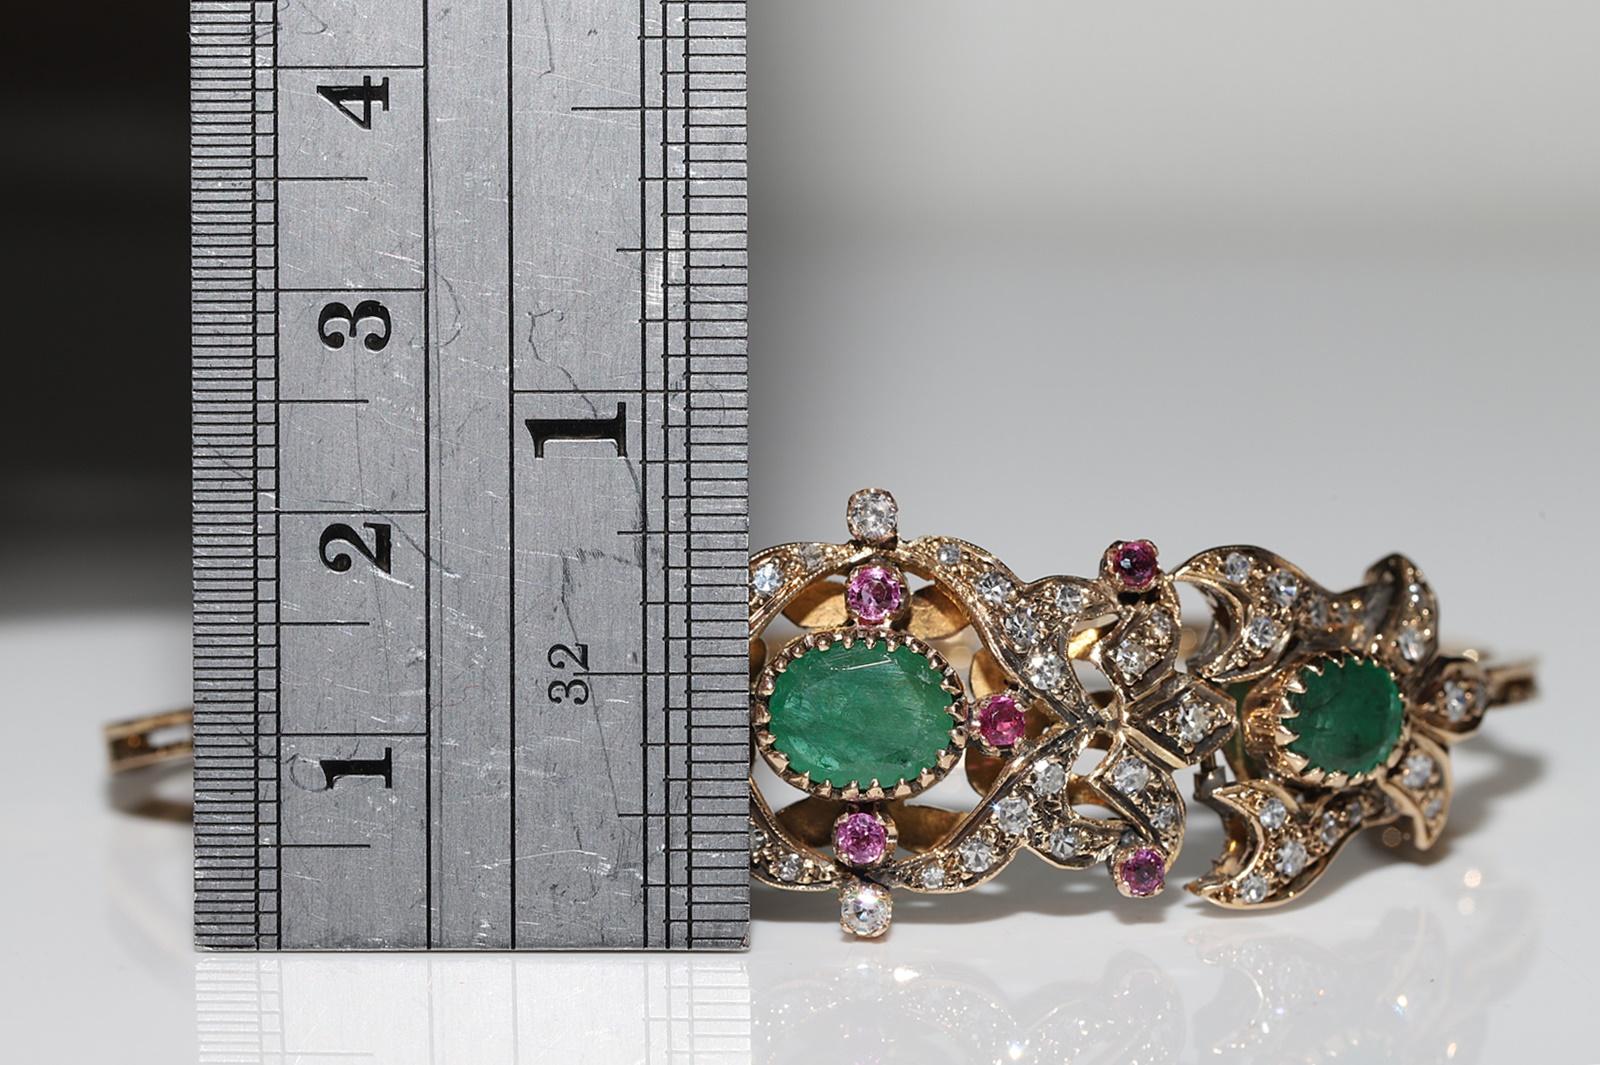 Vintage Circa 1960s 14k Gold Natural Diamond And Emerald And Ruby Bracelet For Sale 3